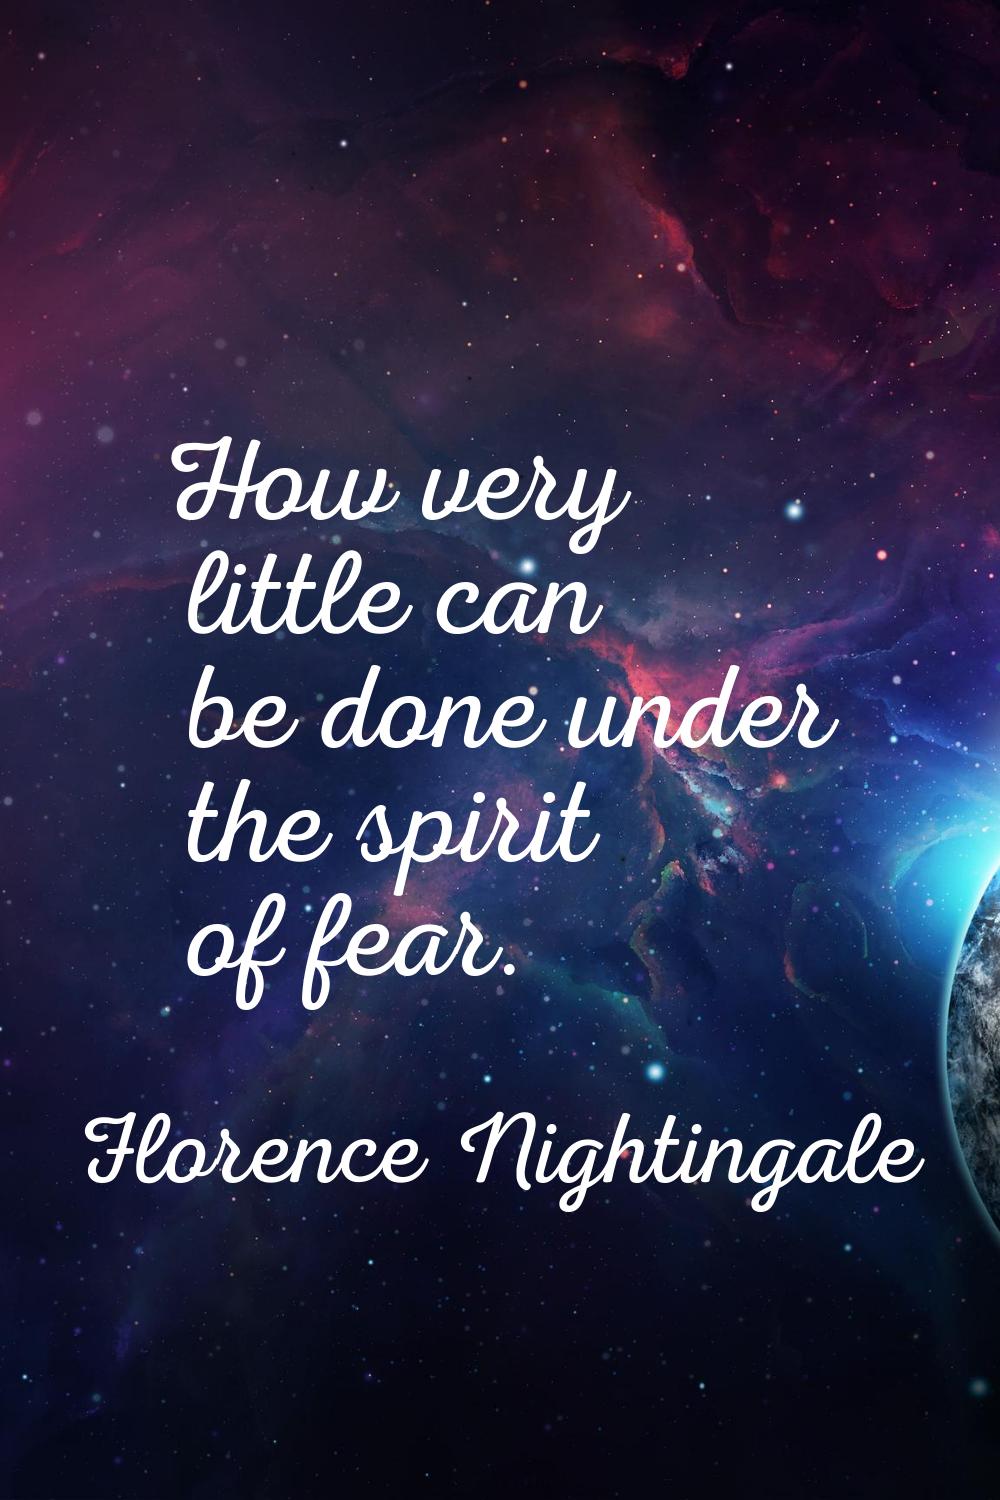 How very little can be done under the spirit of fear.